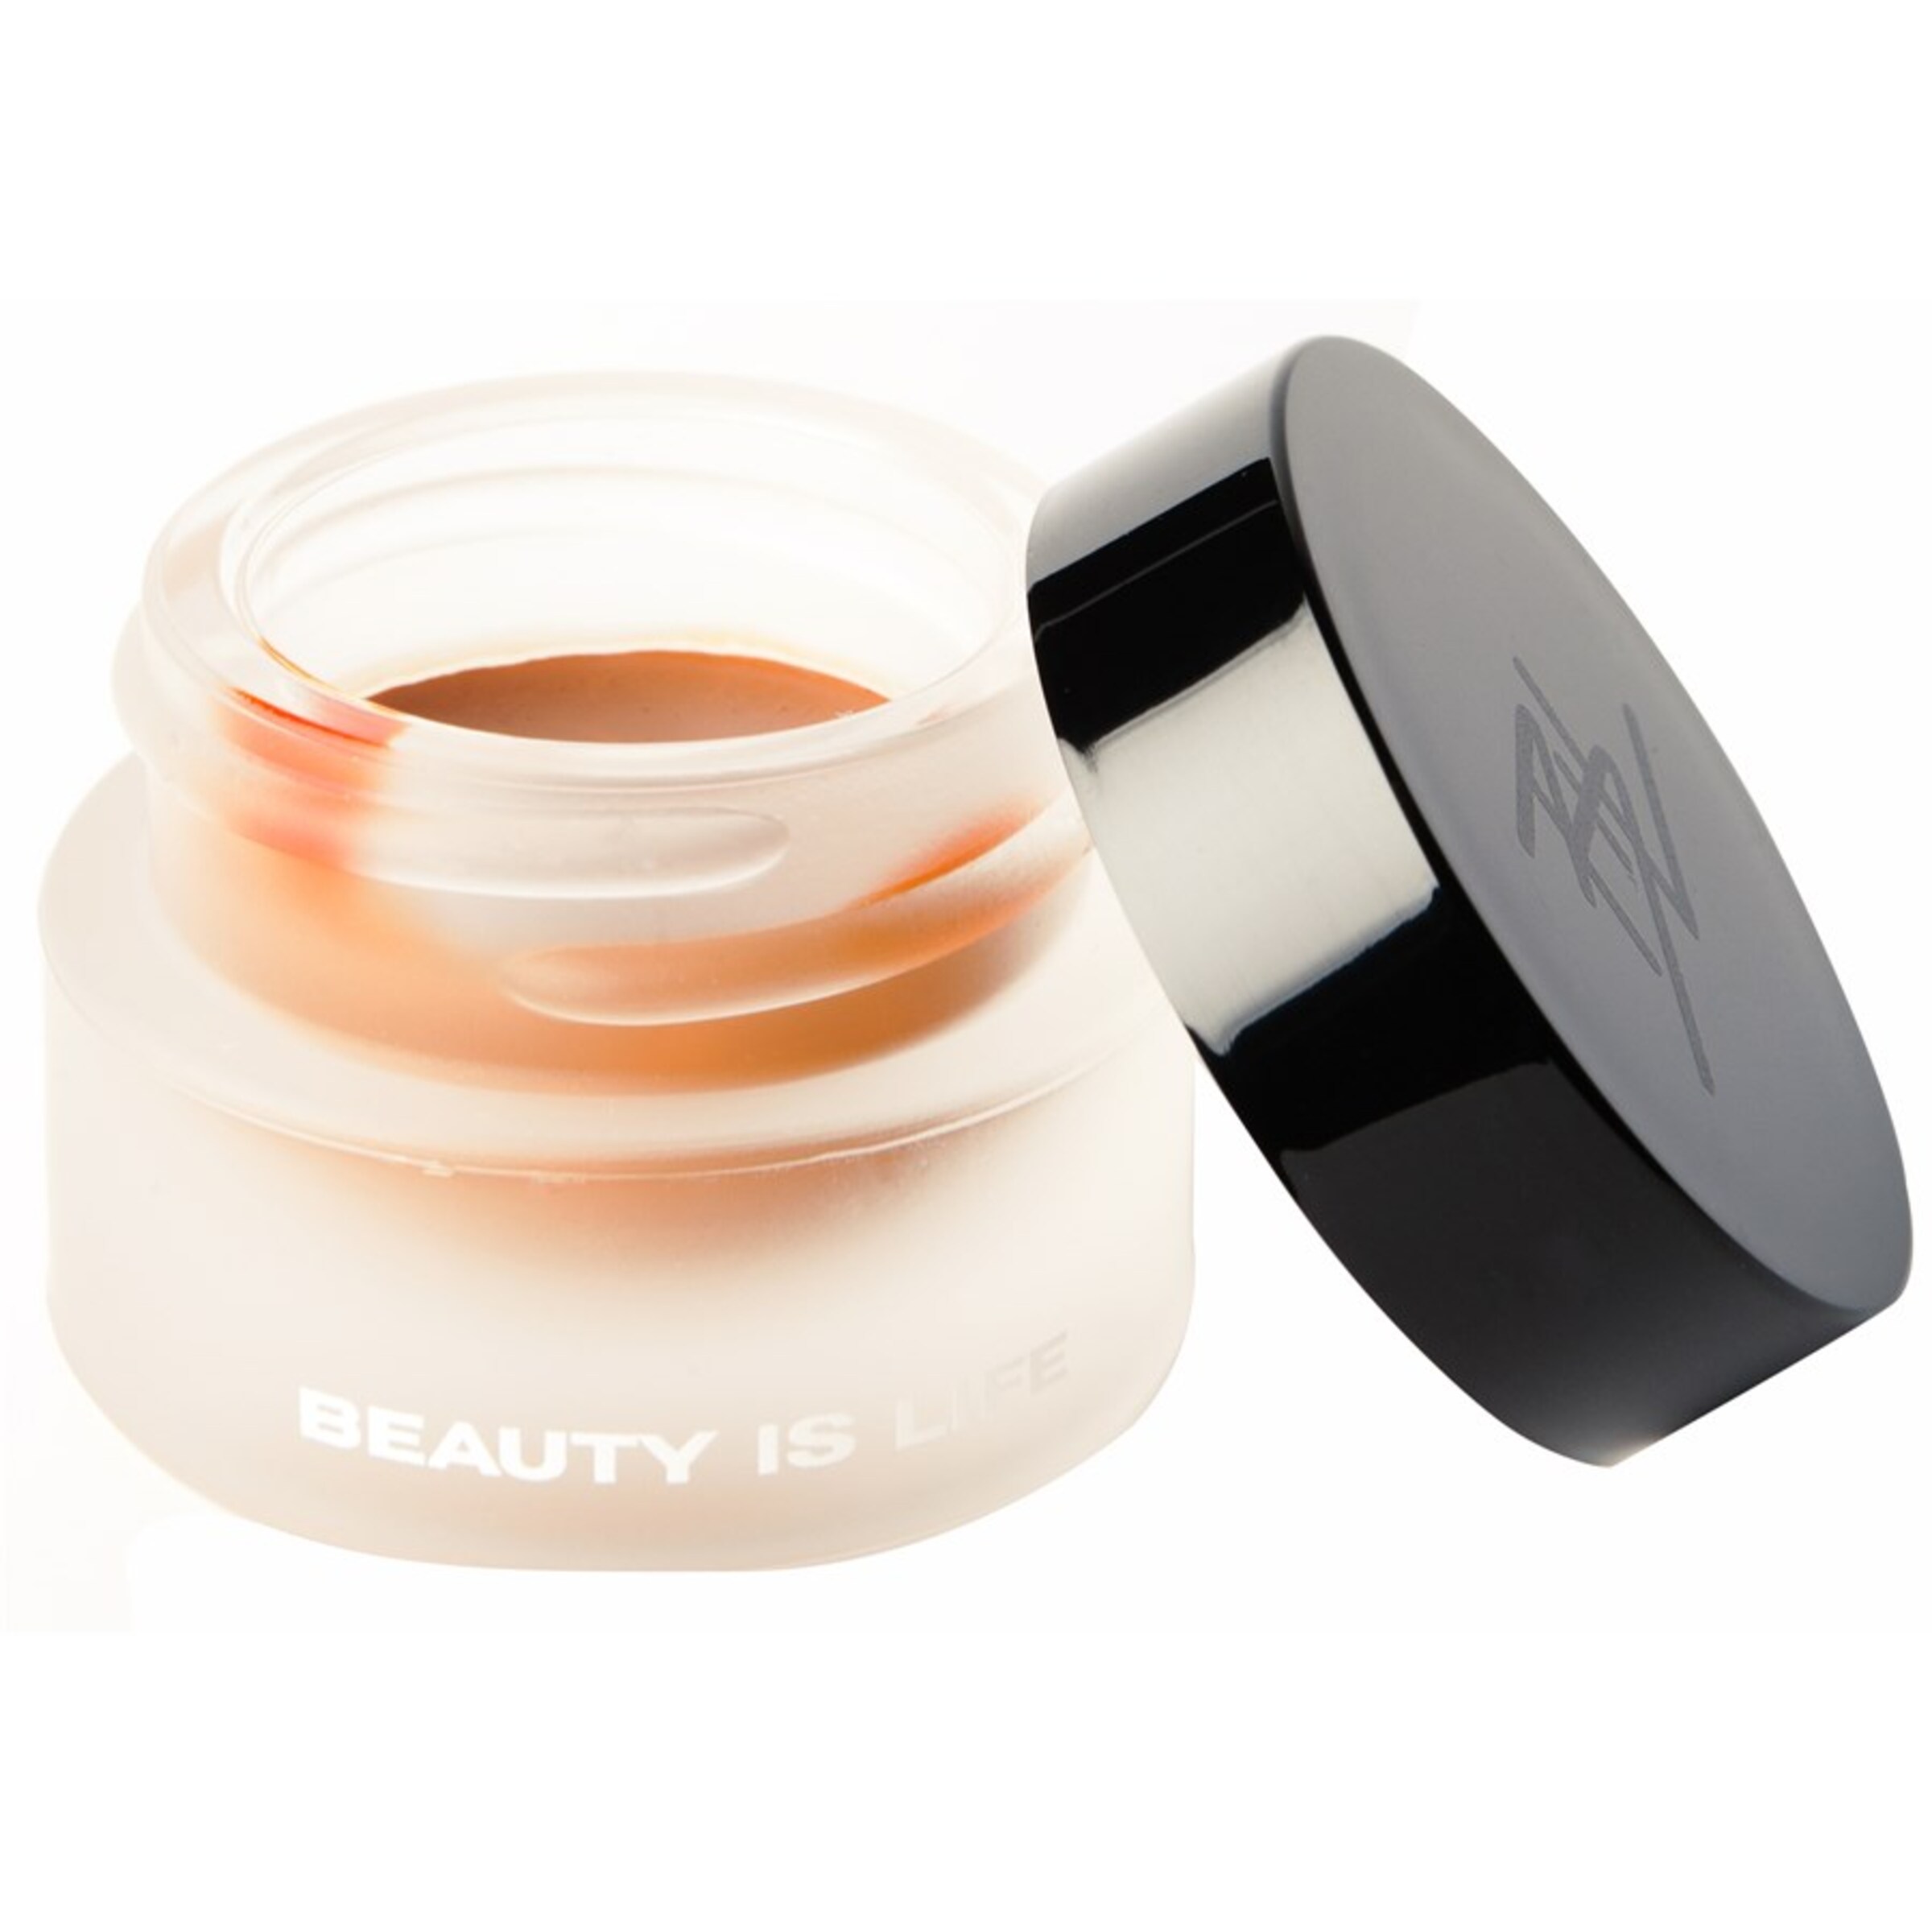 BEAUTY IS LIFE Concealer in Braun 